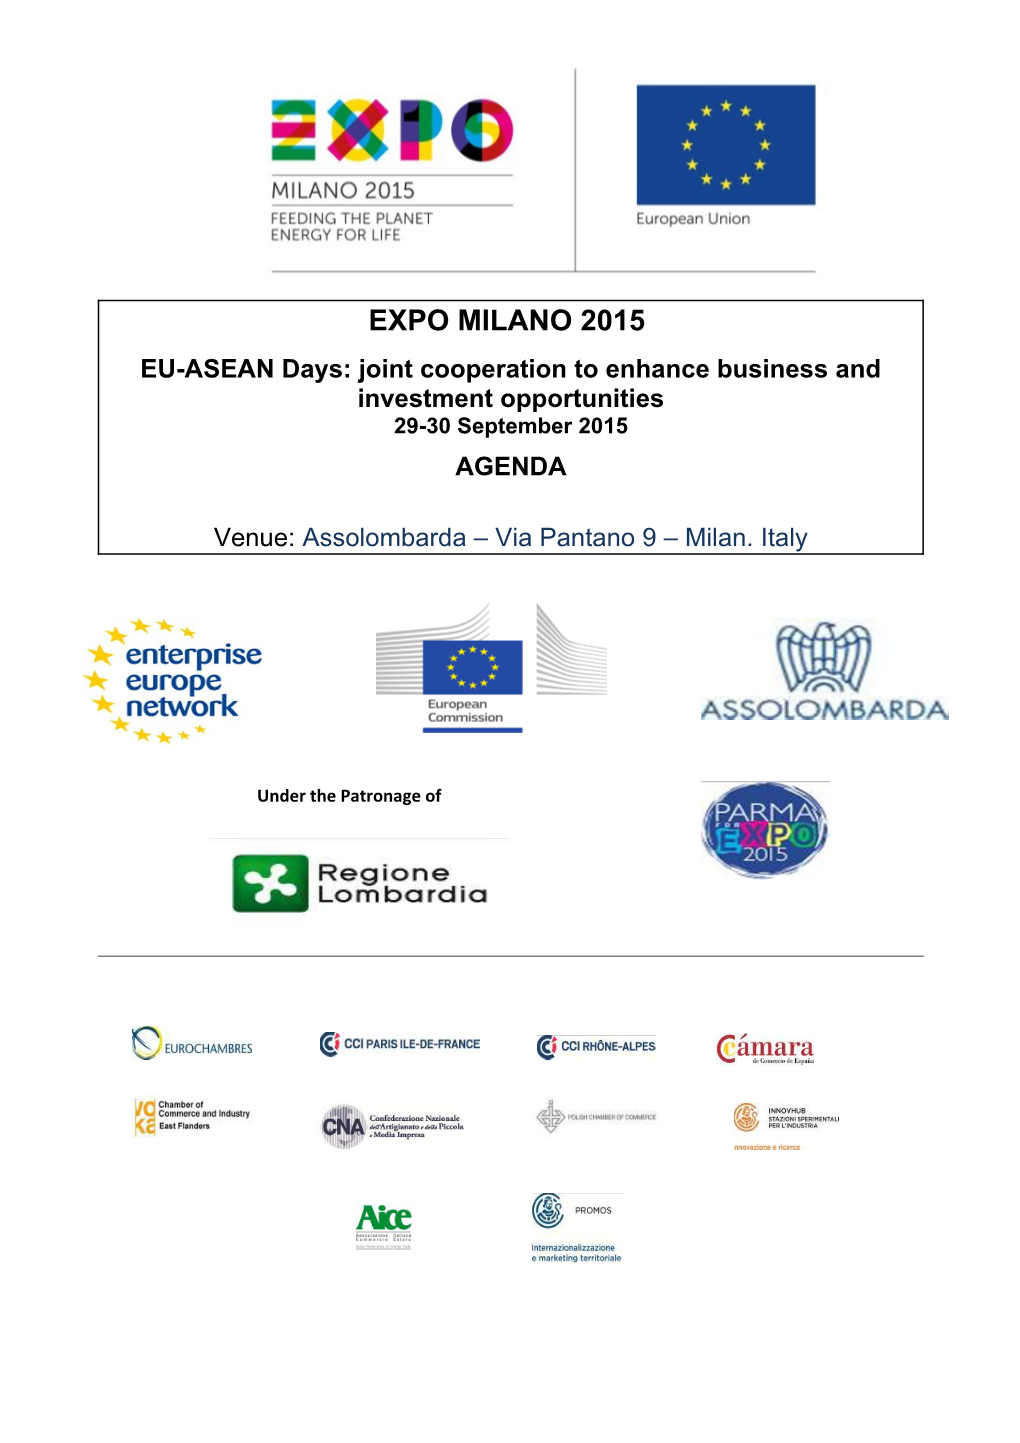 EU-ASEAN Days: Joint Cooperation to Enhance Business and Investment Opportunities